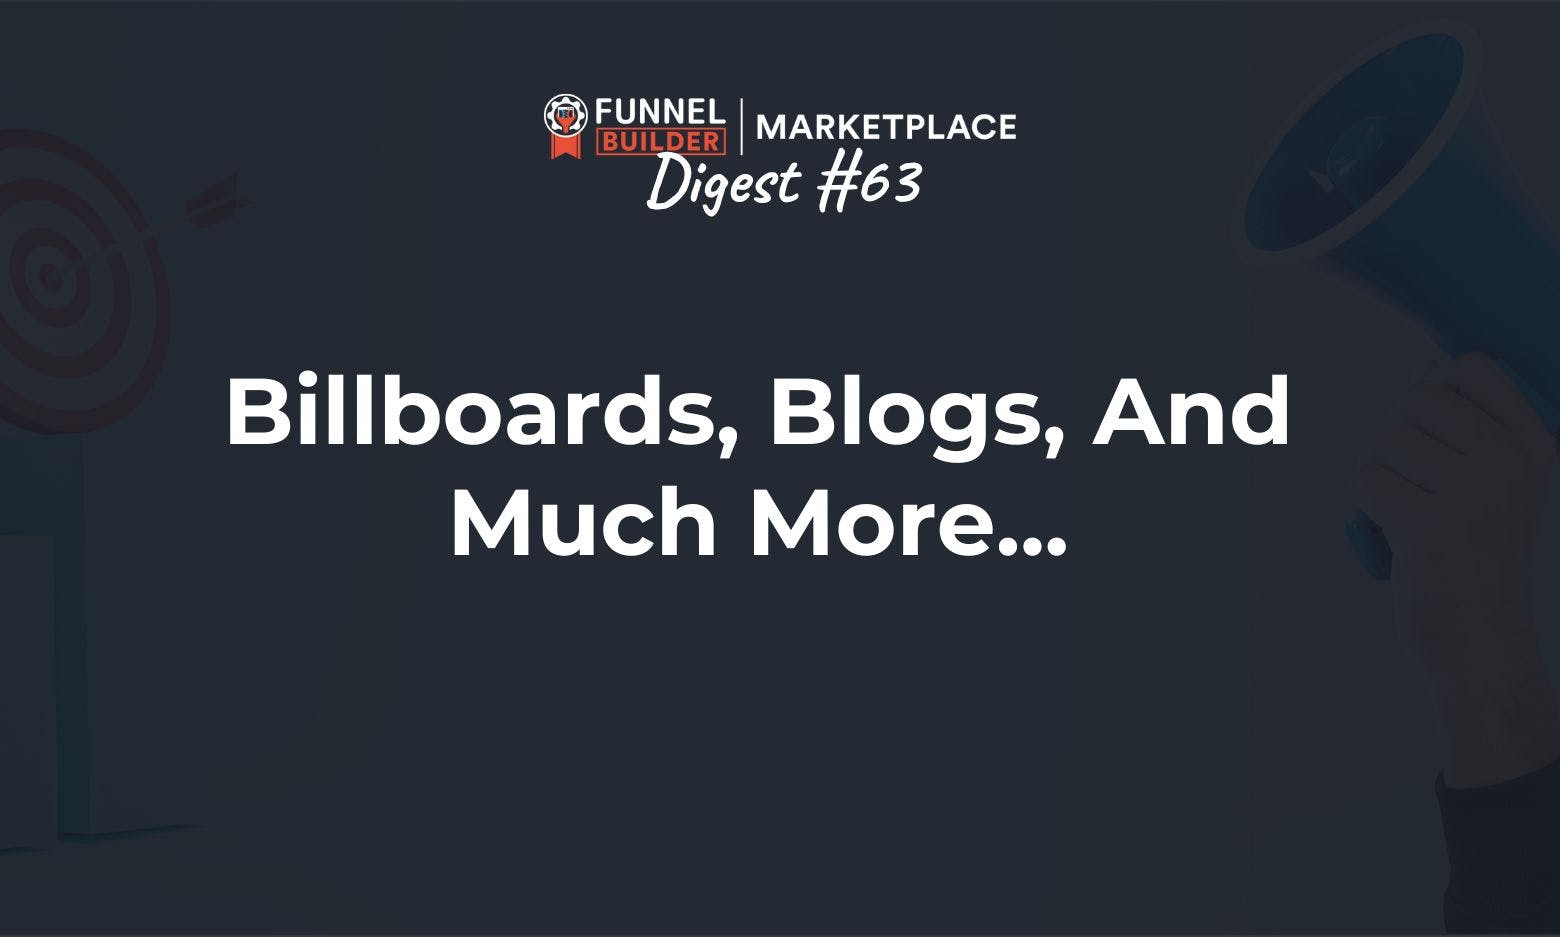 FBM Digest #63: Billboards, blogs, and much more...